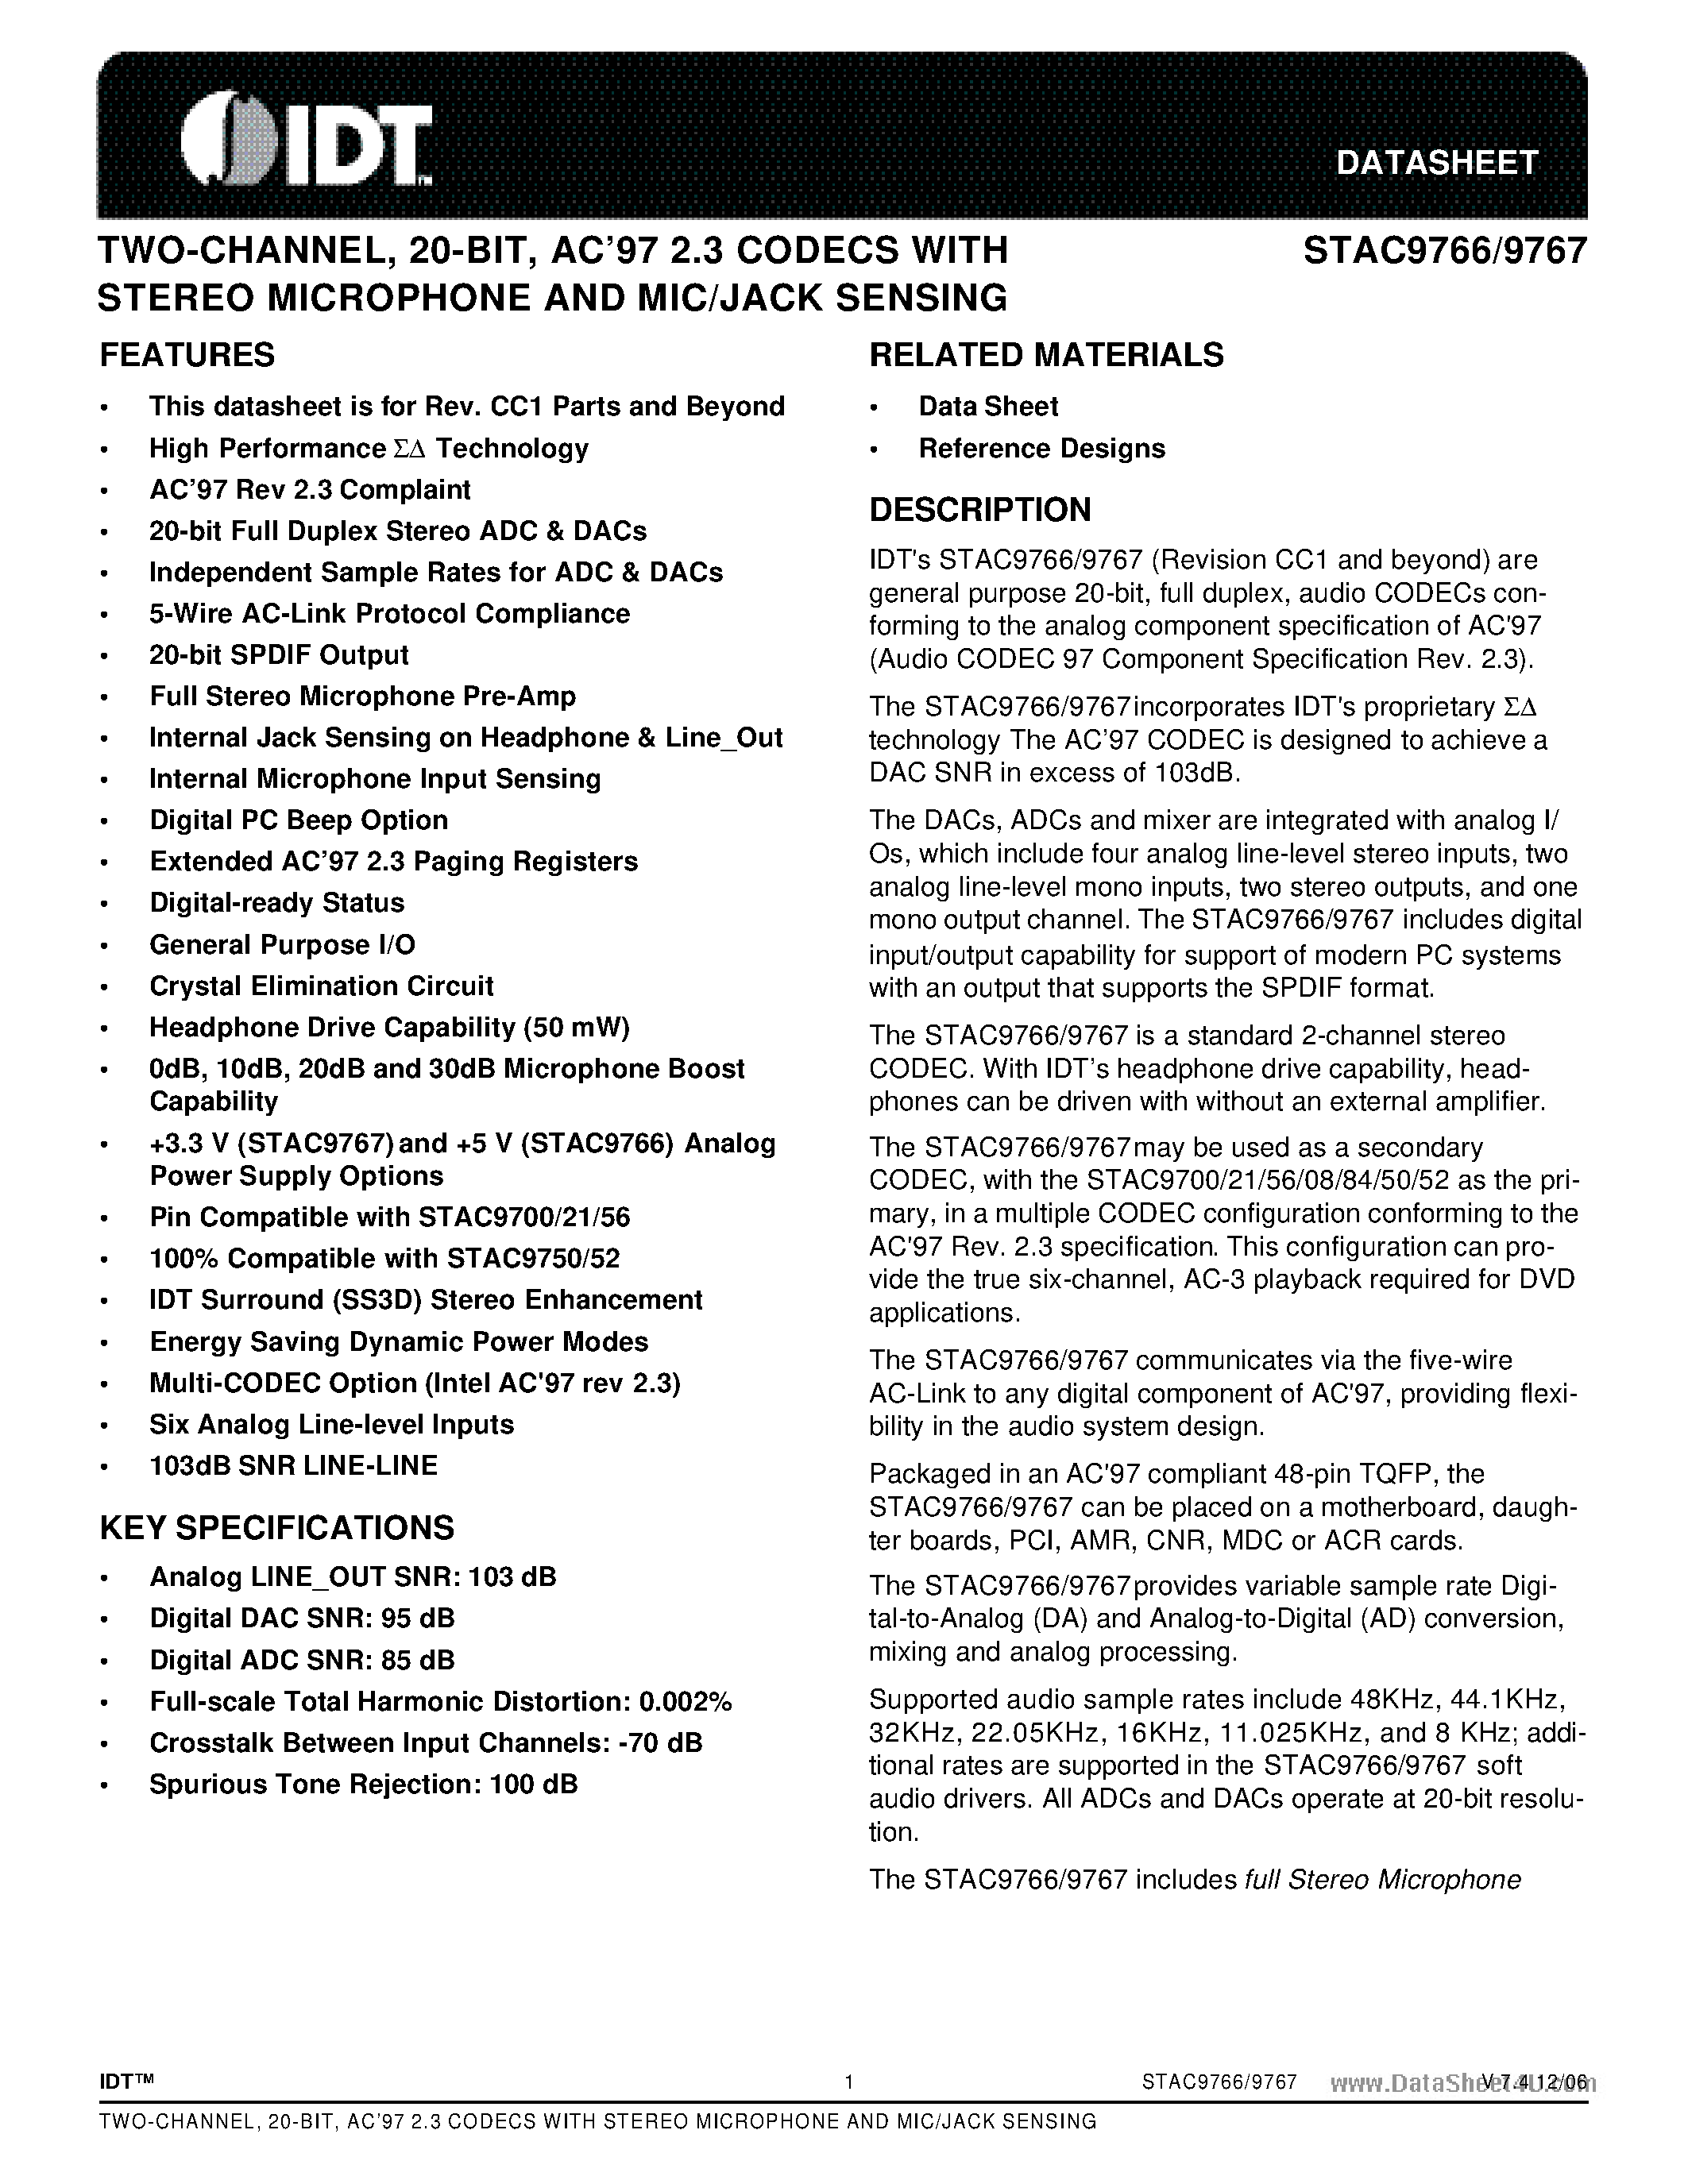 Datasheet STAC9766 - (STAC9766 / STAC9767) TWO-CHANNEL AC97 2.3 CODECS page 1